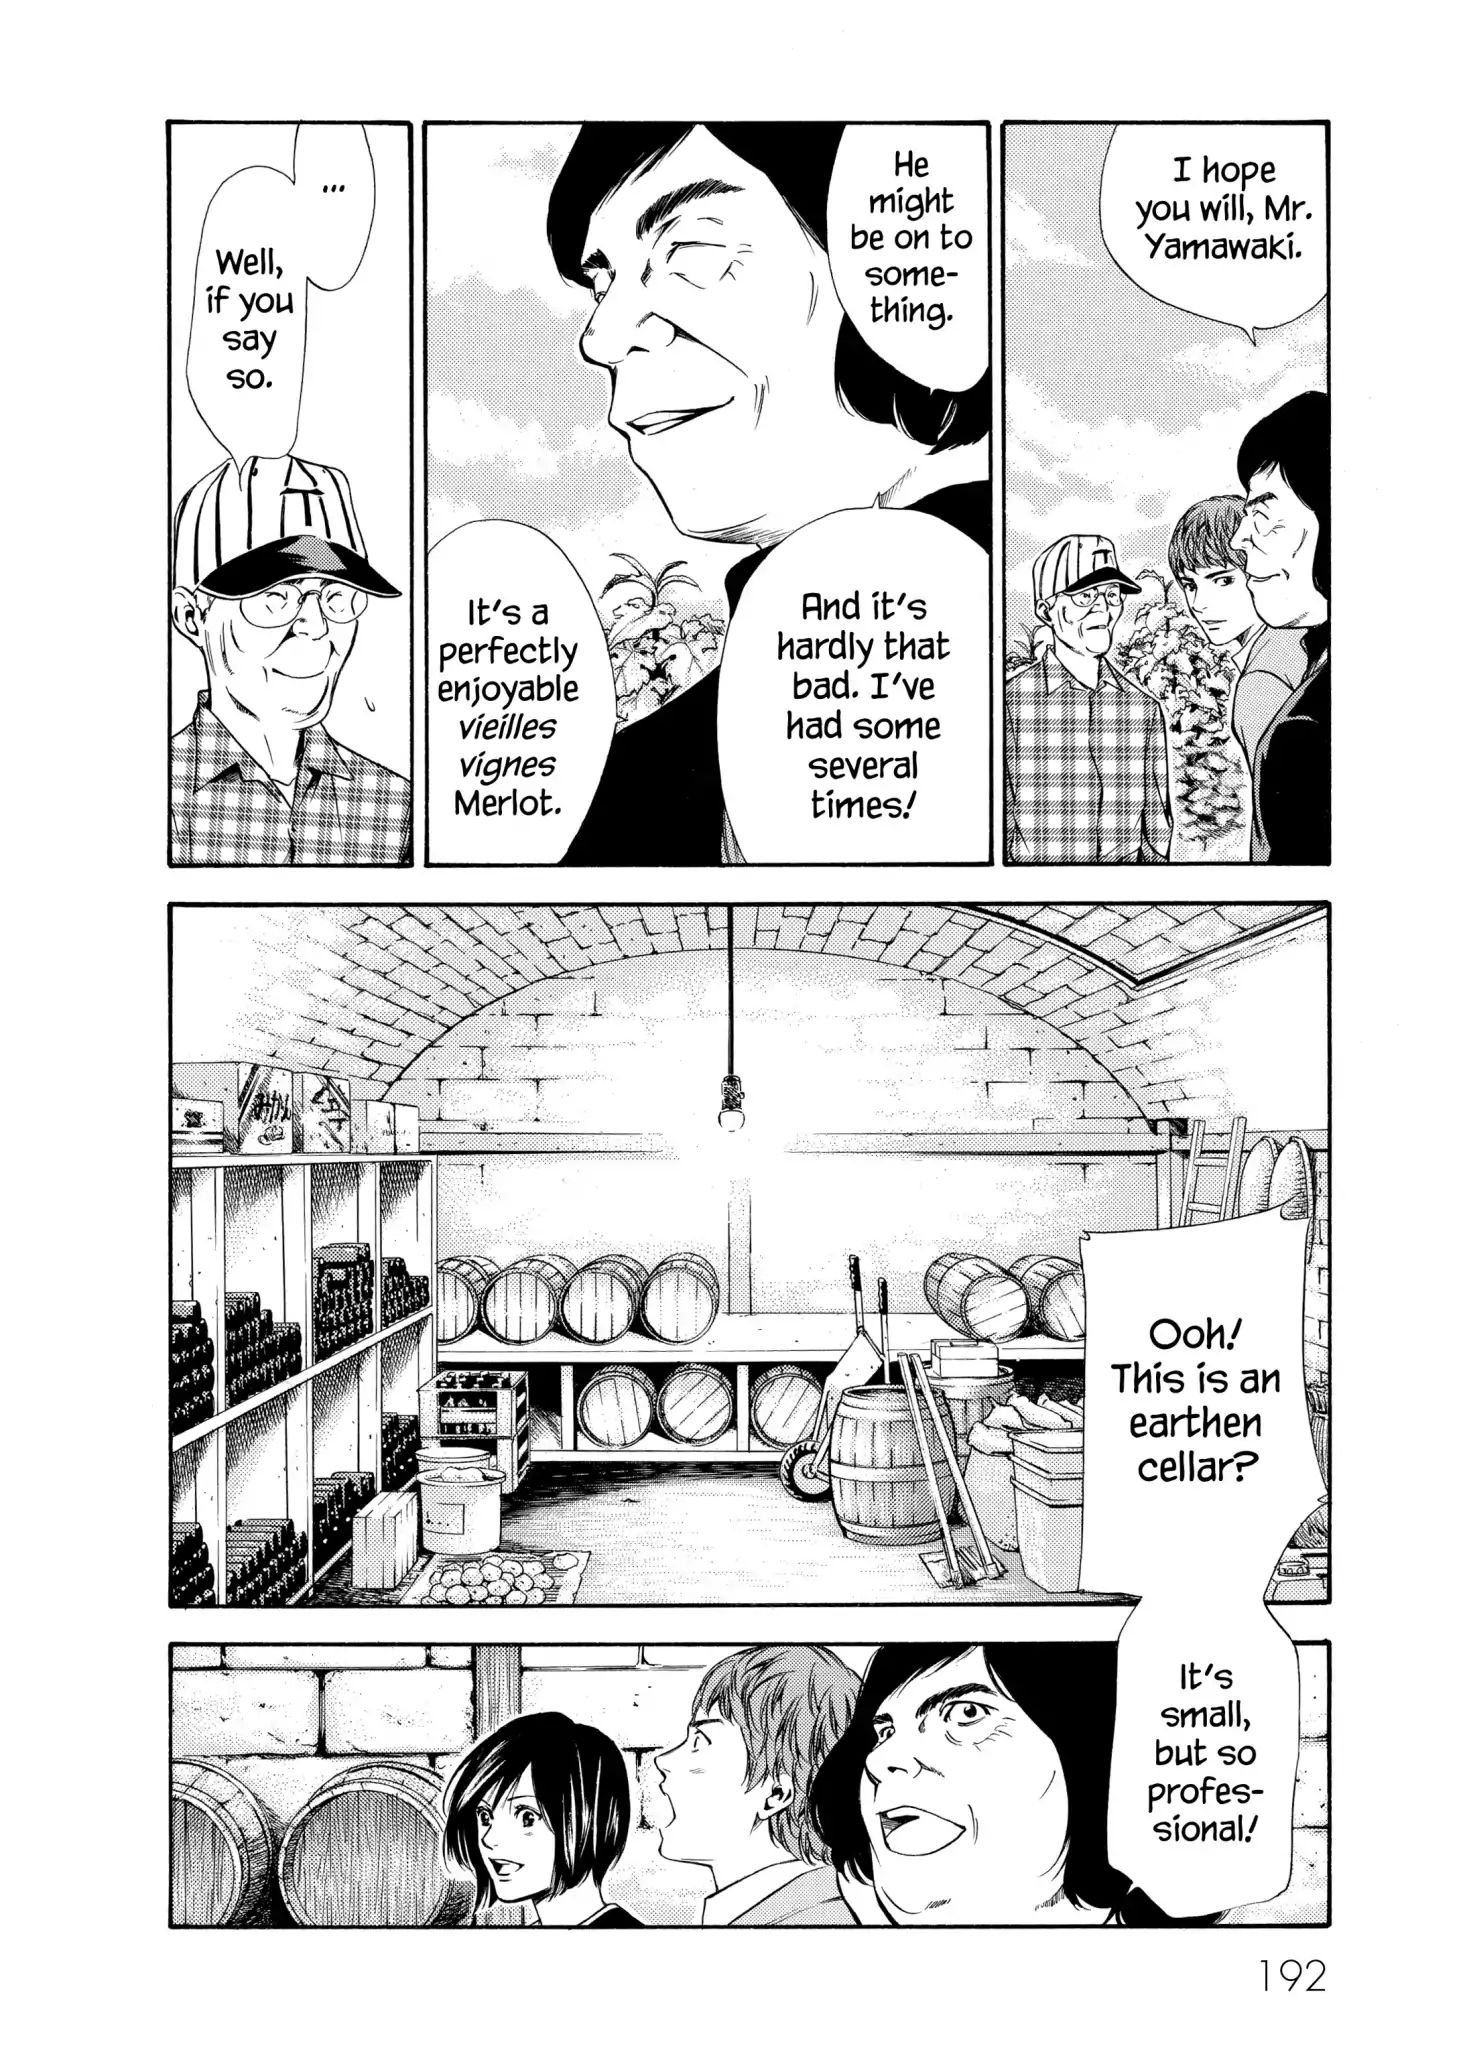 Kami No Shizuku Vol.10 Chapter 98: Connecting The Future, Connected To The Past - Picture 2